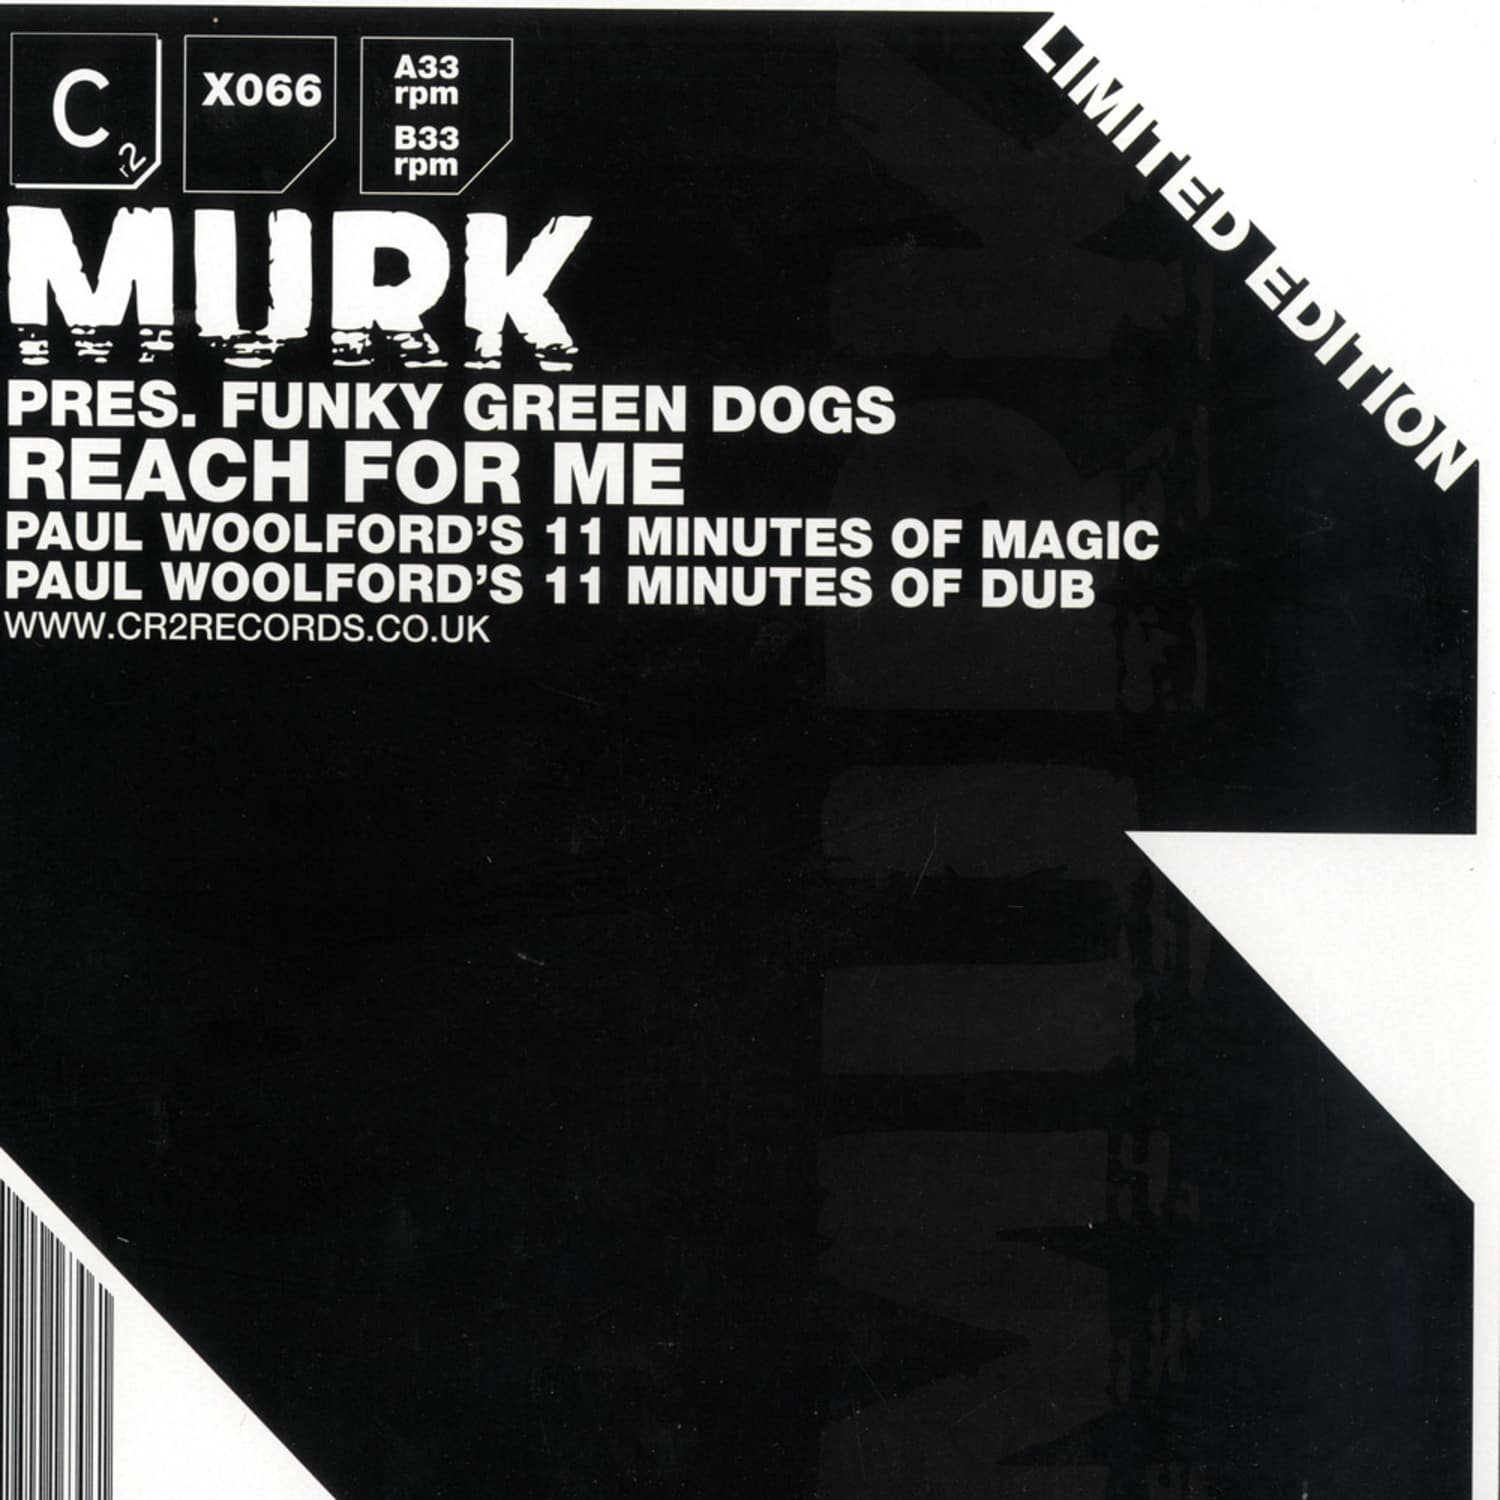 Murk pres. Funky Green Dogs - REACH FOR ME REMIX